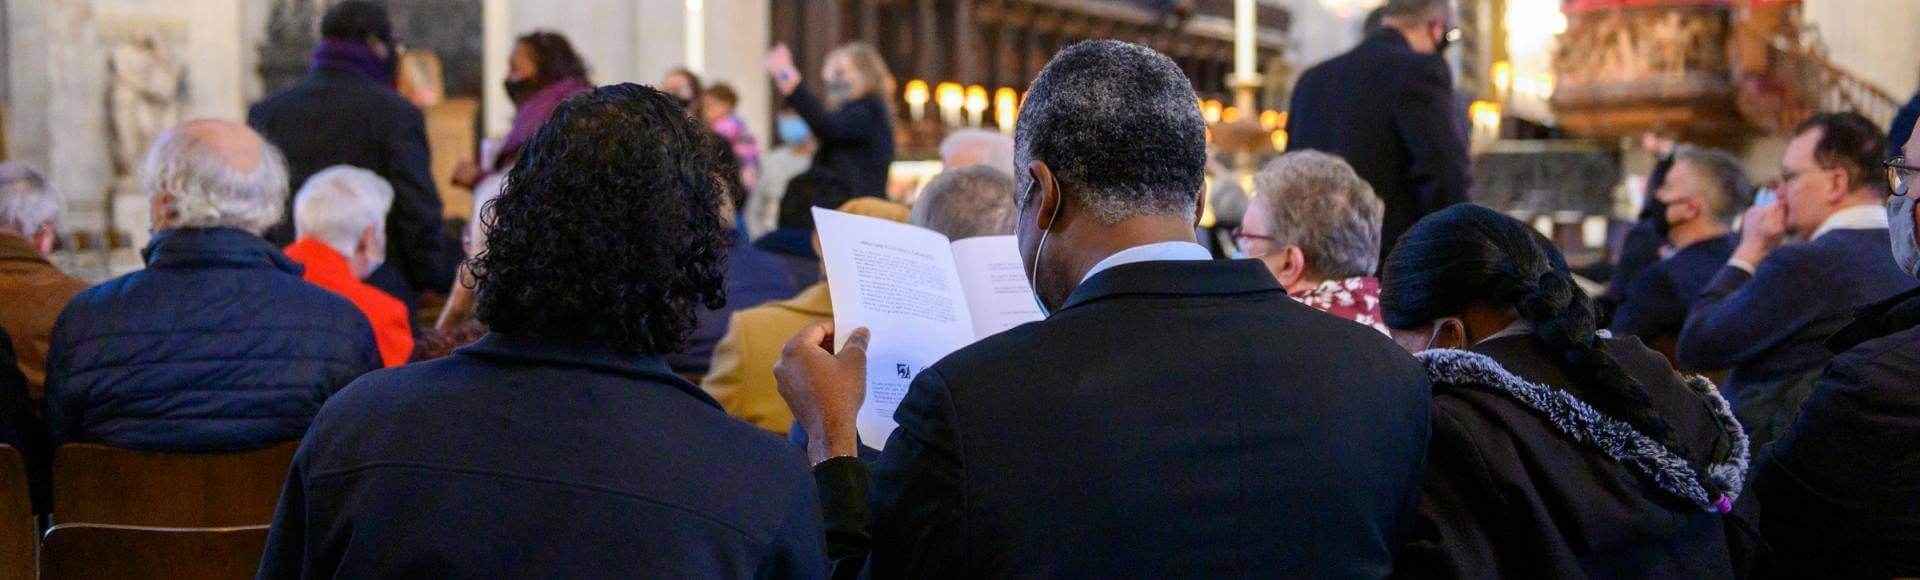 couple reading service schedule during consecration service